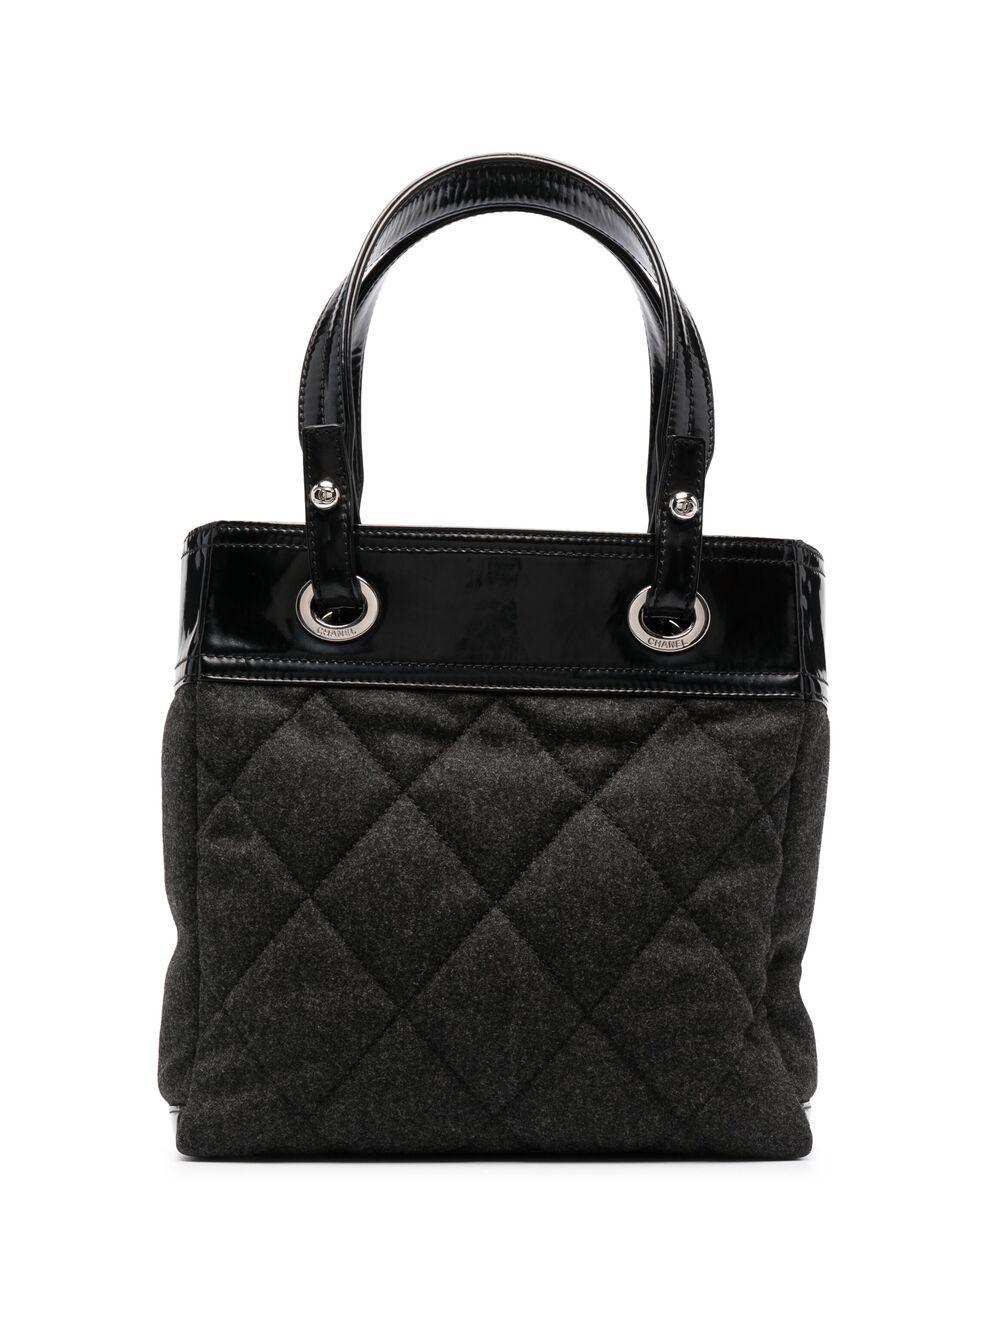 Chanel by Karl Lagerfeld grey wool “Paris-Biarritz” tote bag featuring a diamond quilted pattern, black patent leather details, leather handles, a top zip opening, silver-tone hardware, an inside pocket.
Delivered with his authenticity card.
Circa